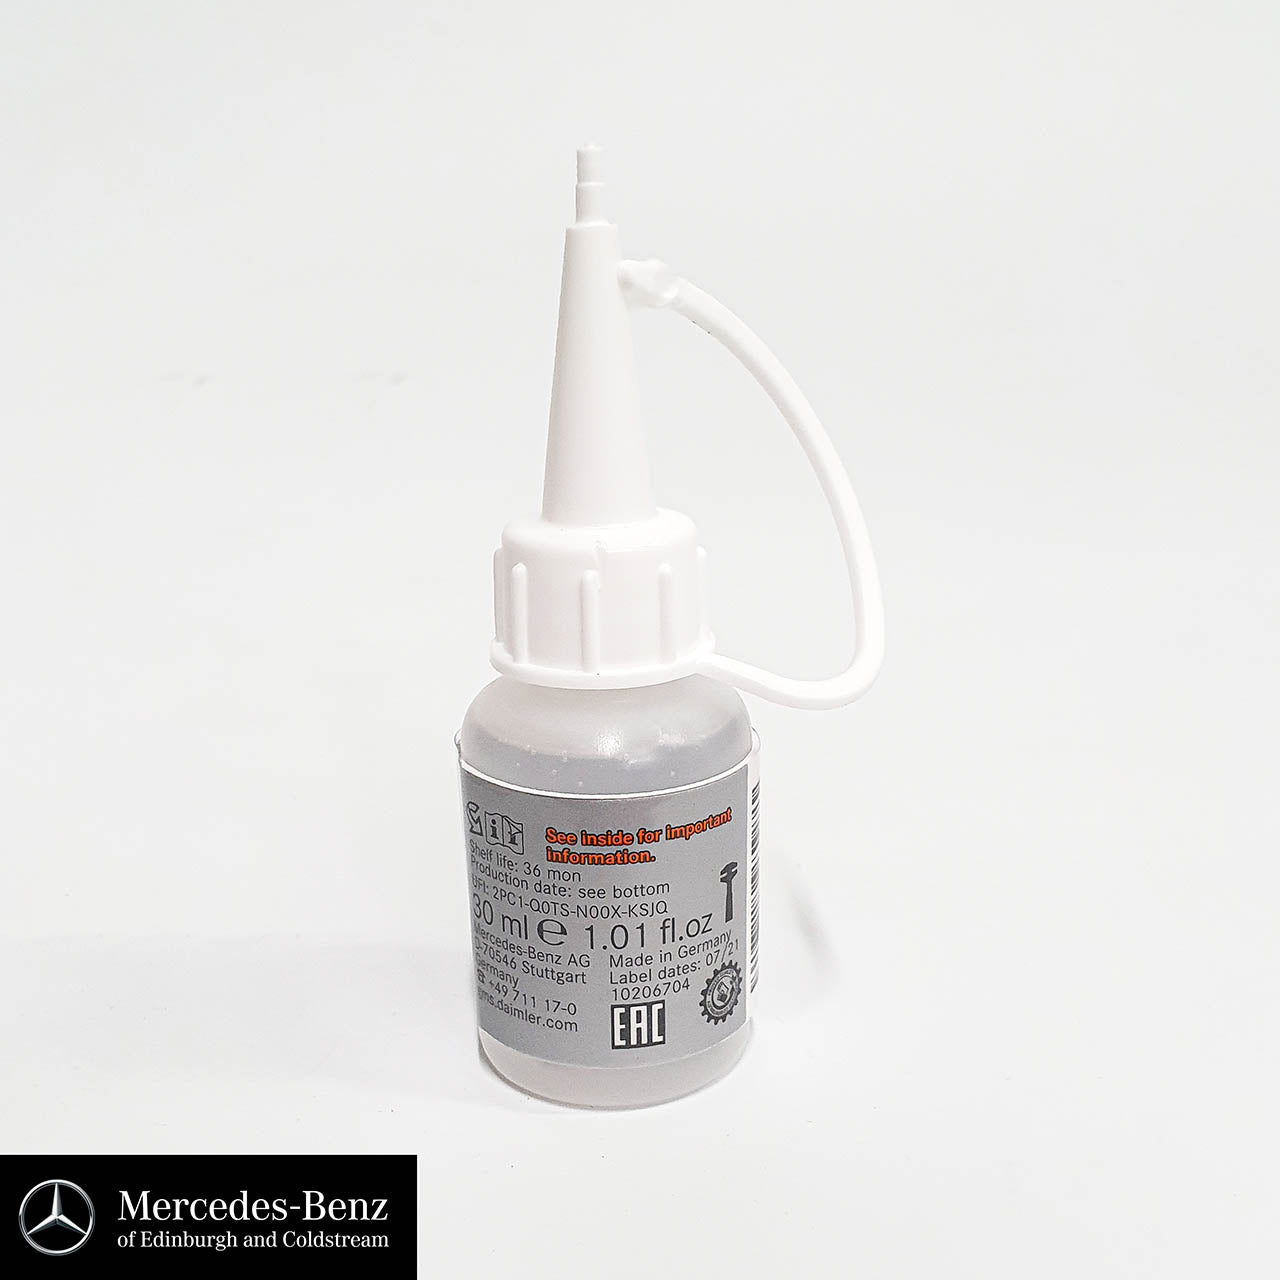 Lubrication oil, special sliding compound for sun roof and seals